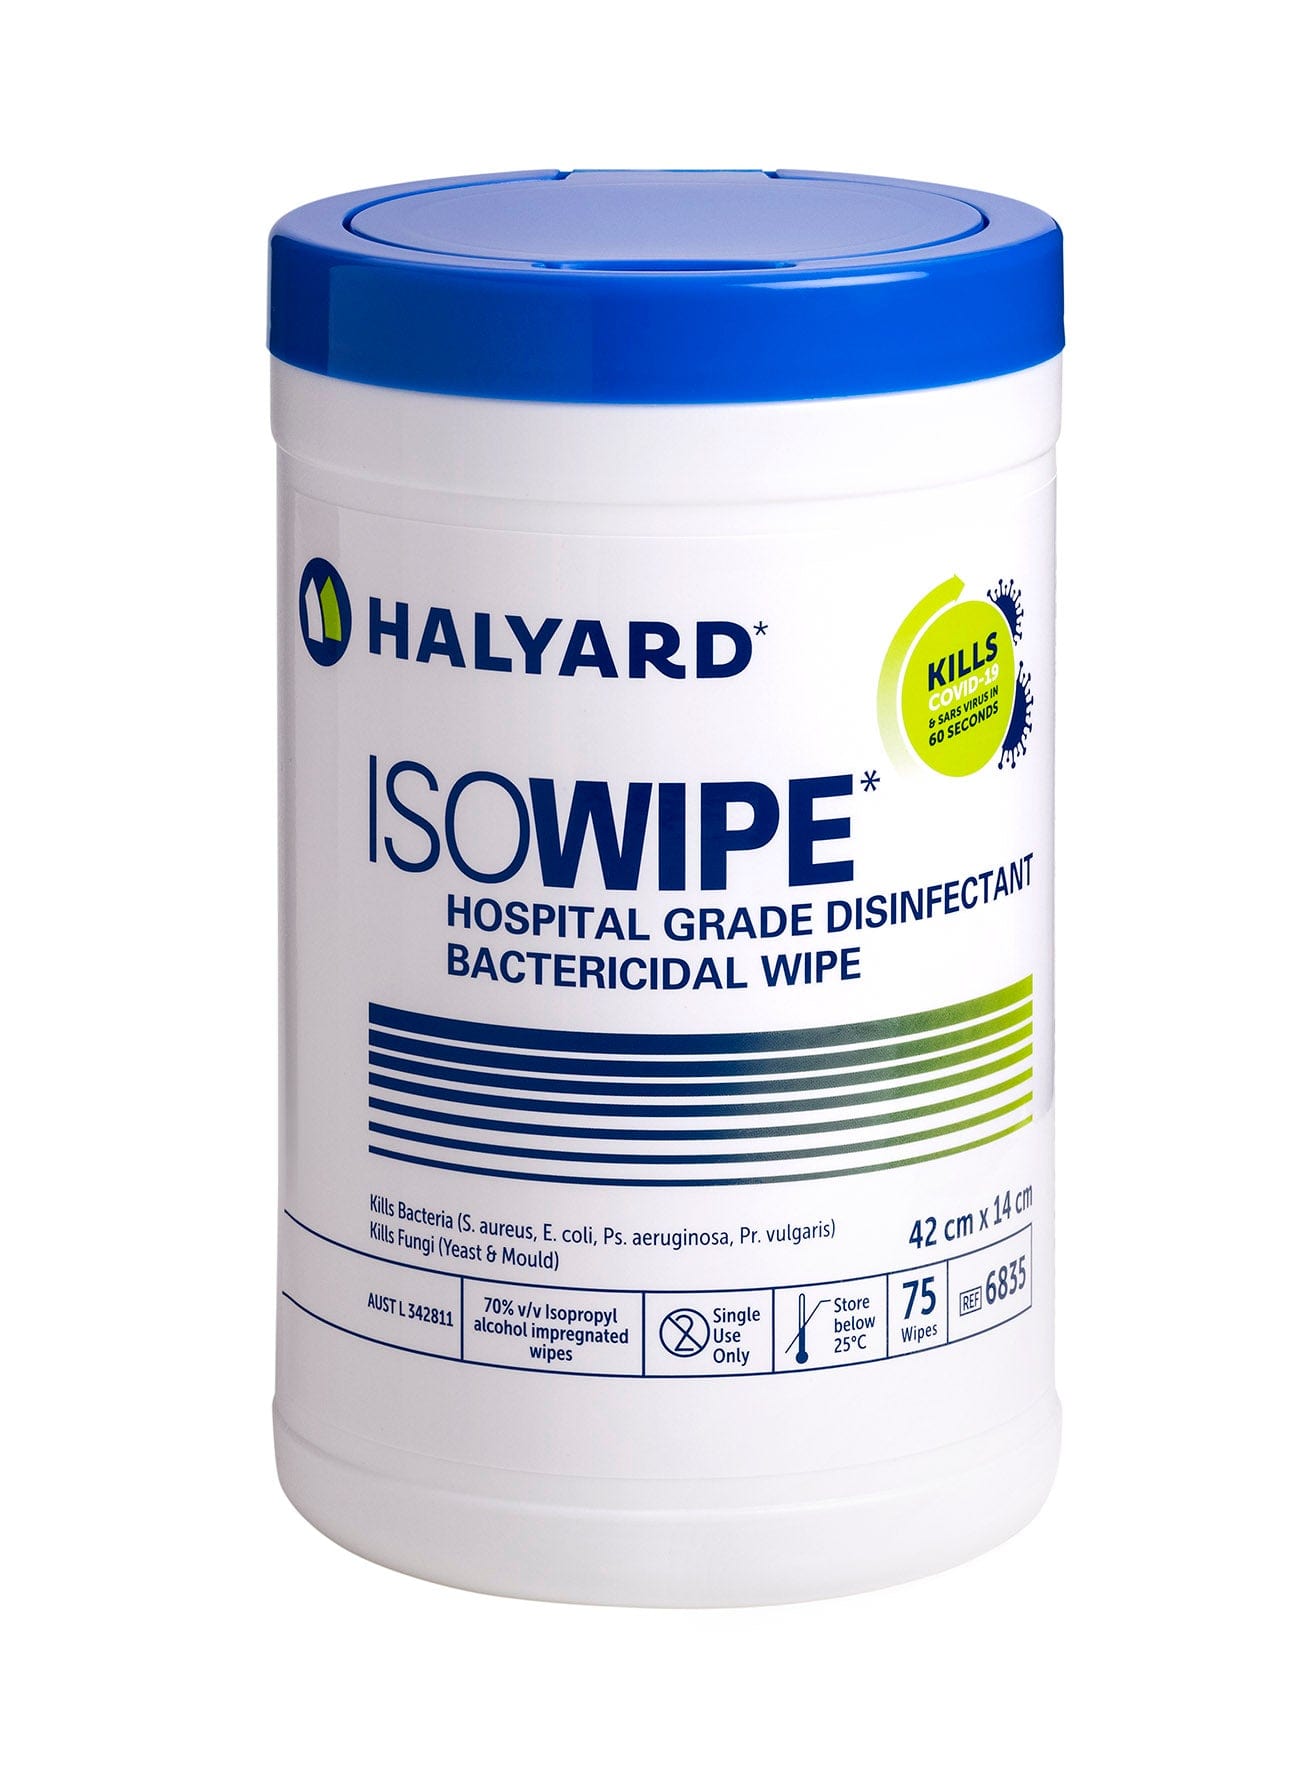 Halyard Surface Wipes Canister ISOWIPE Bactericidal Wipes